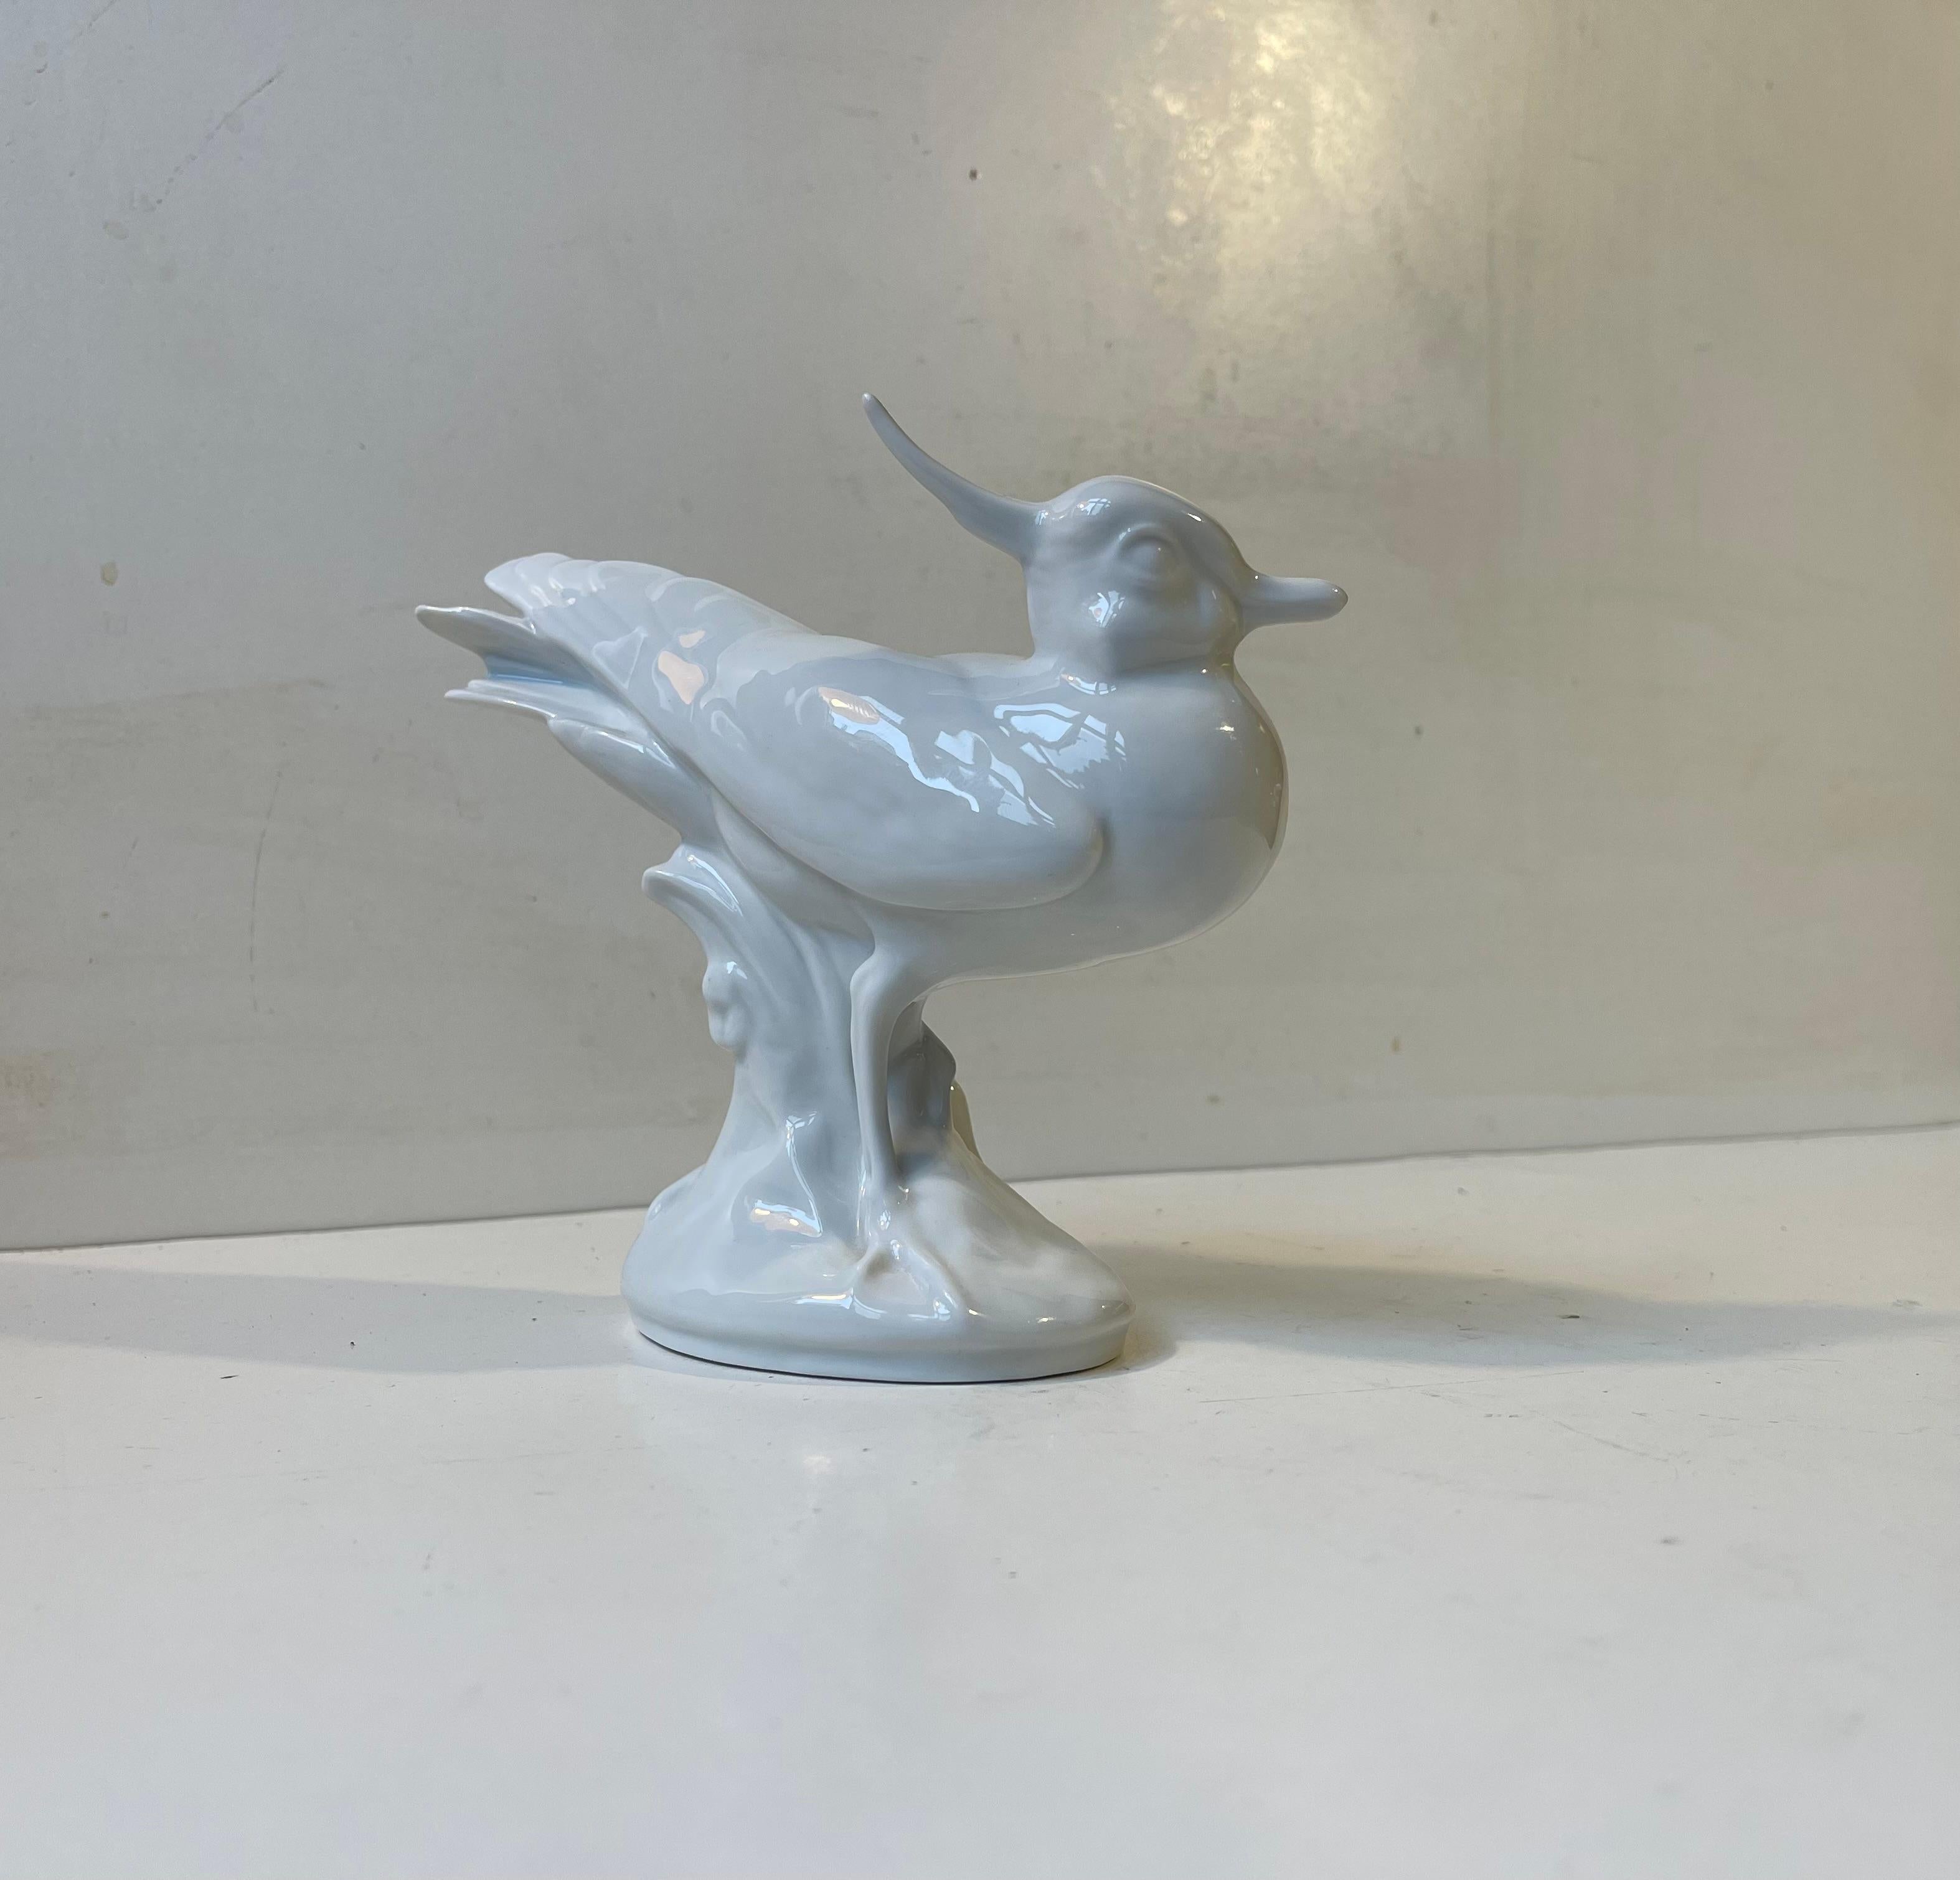 A stylish Vibe bird,Vanellus vanellus in latin. Relaunced in 2008 by Royal Copenhagen in Denmark in their 'white line'. A series in all white glazed porcelain animals designed by Knud Møller and Jeanne Grut. This one is a 1st grade and its by Knud